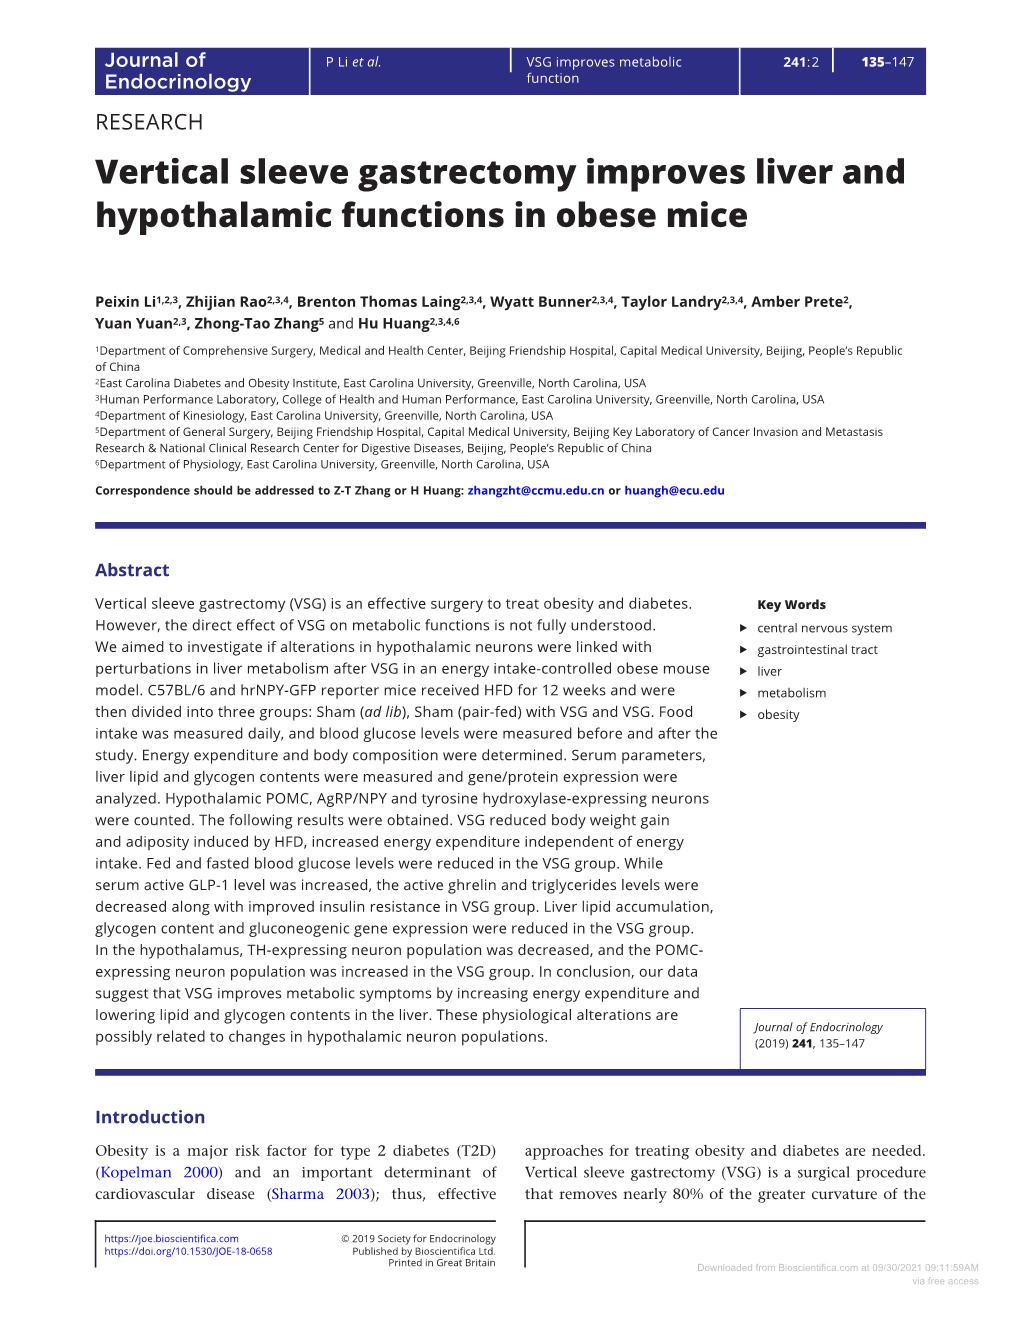 Vertical Sleeve Gastrectomy Improves Liver and Hypothalamic Functions in Obese Mice